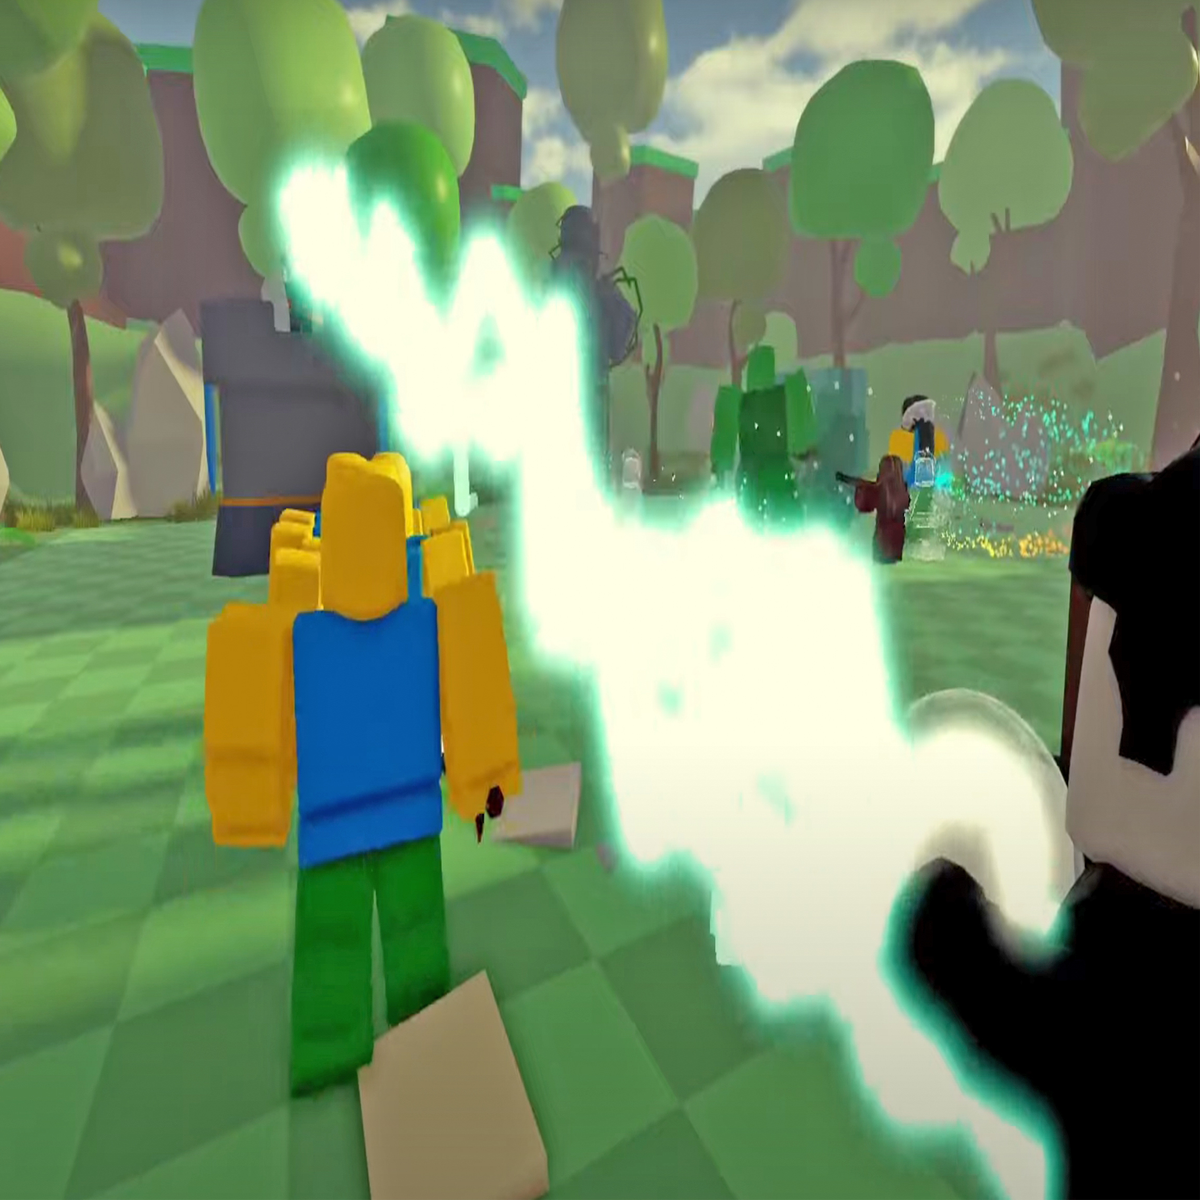 Roblox Solo Blox Leveling Codes for February 2023: Free resets and